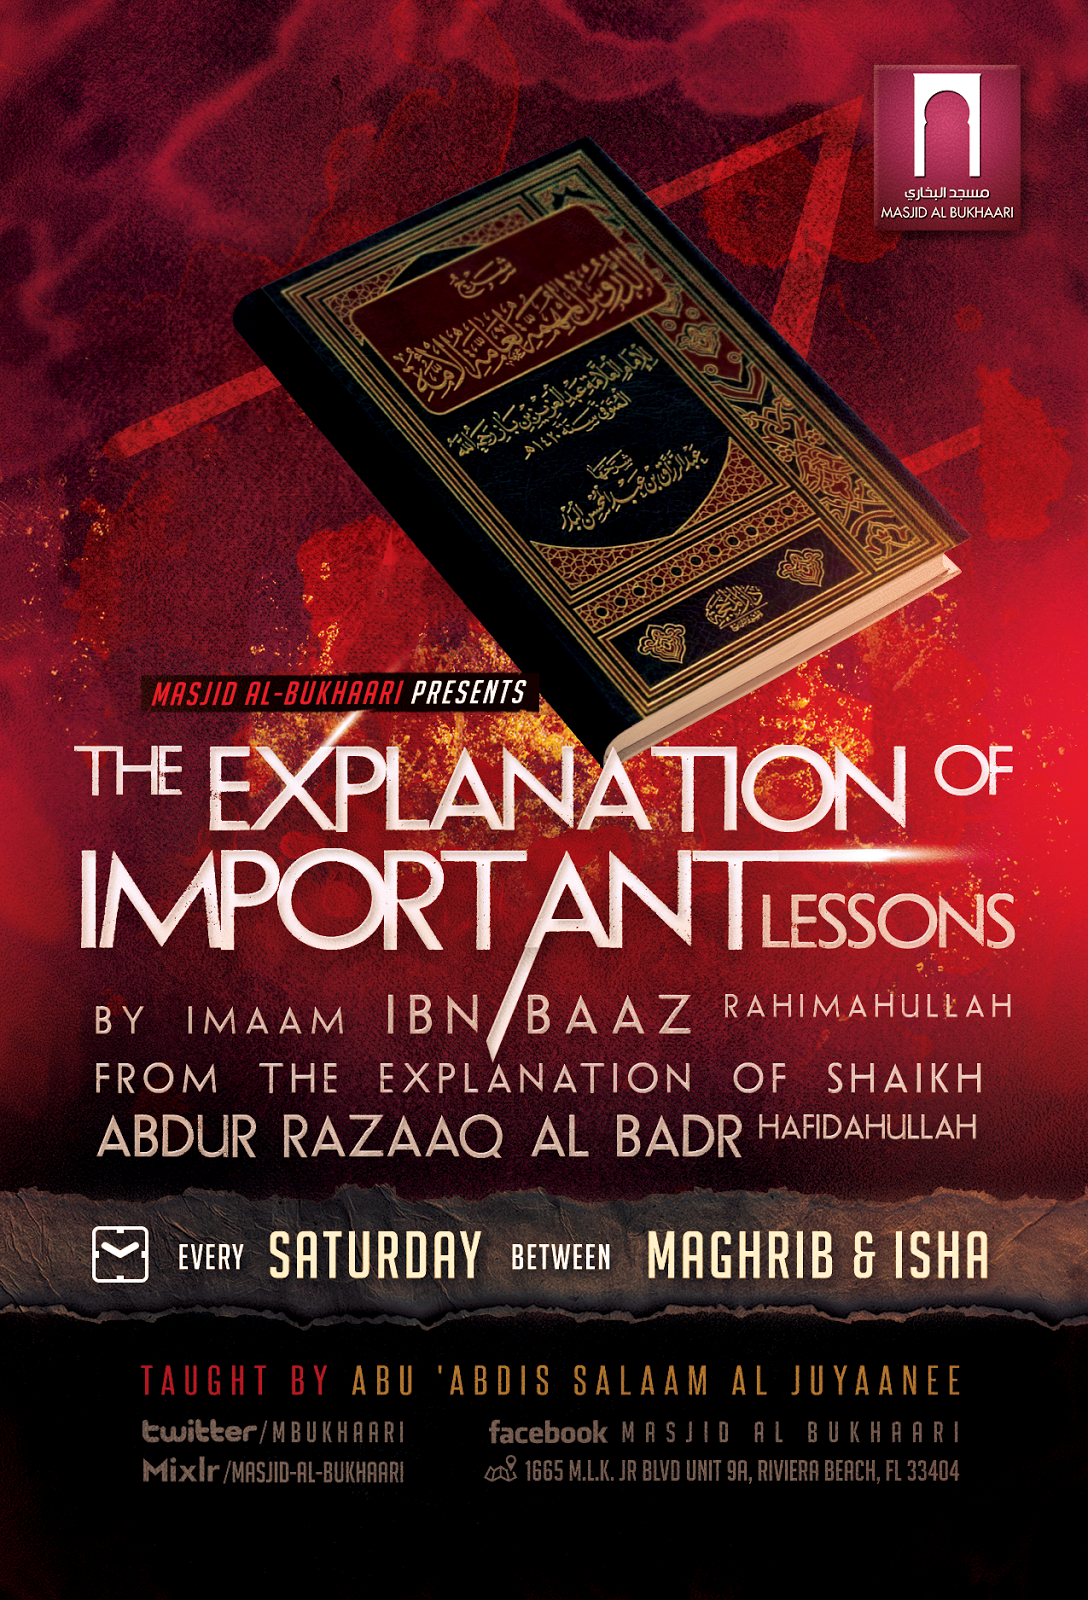 Weekly Class: The Explanation Of Important Lessons